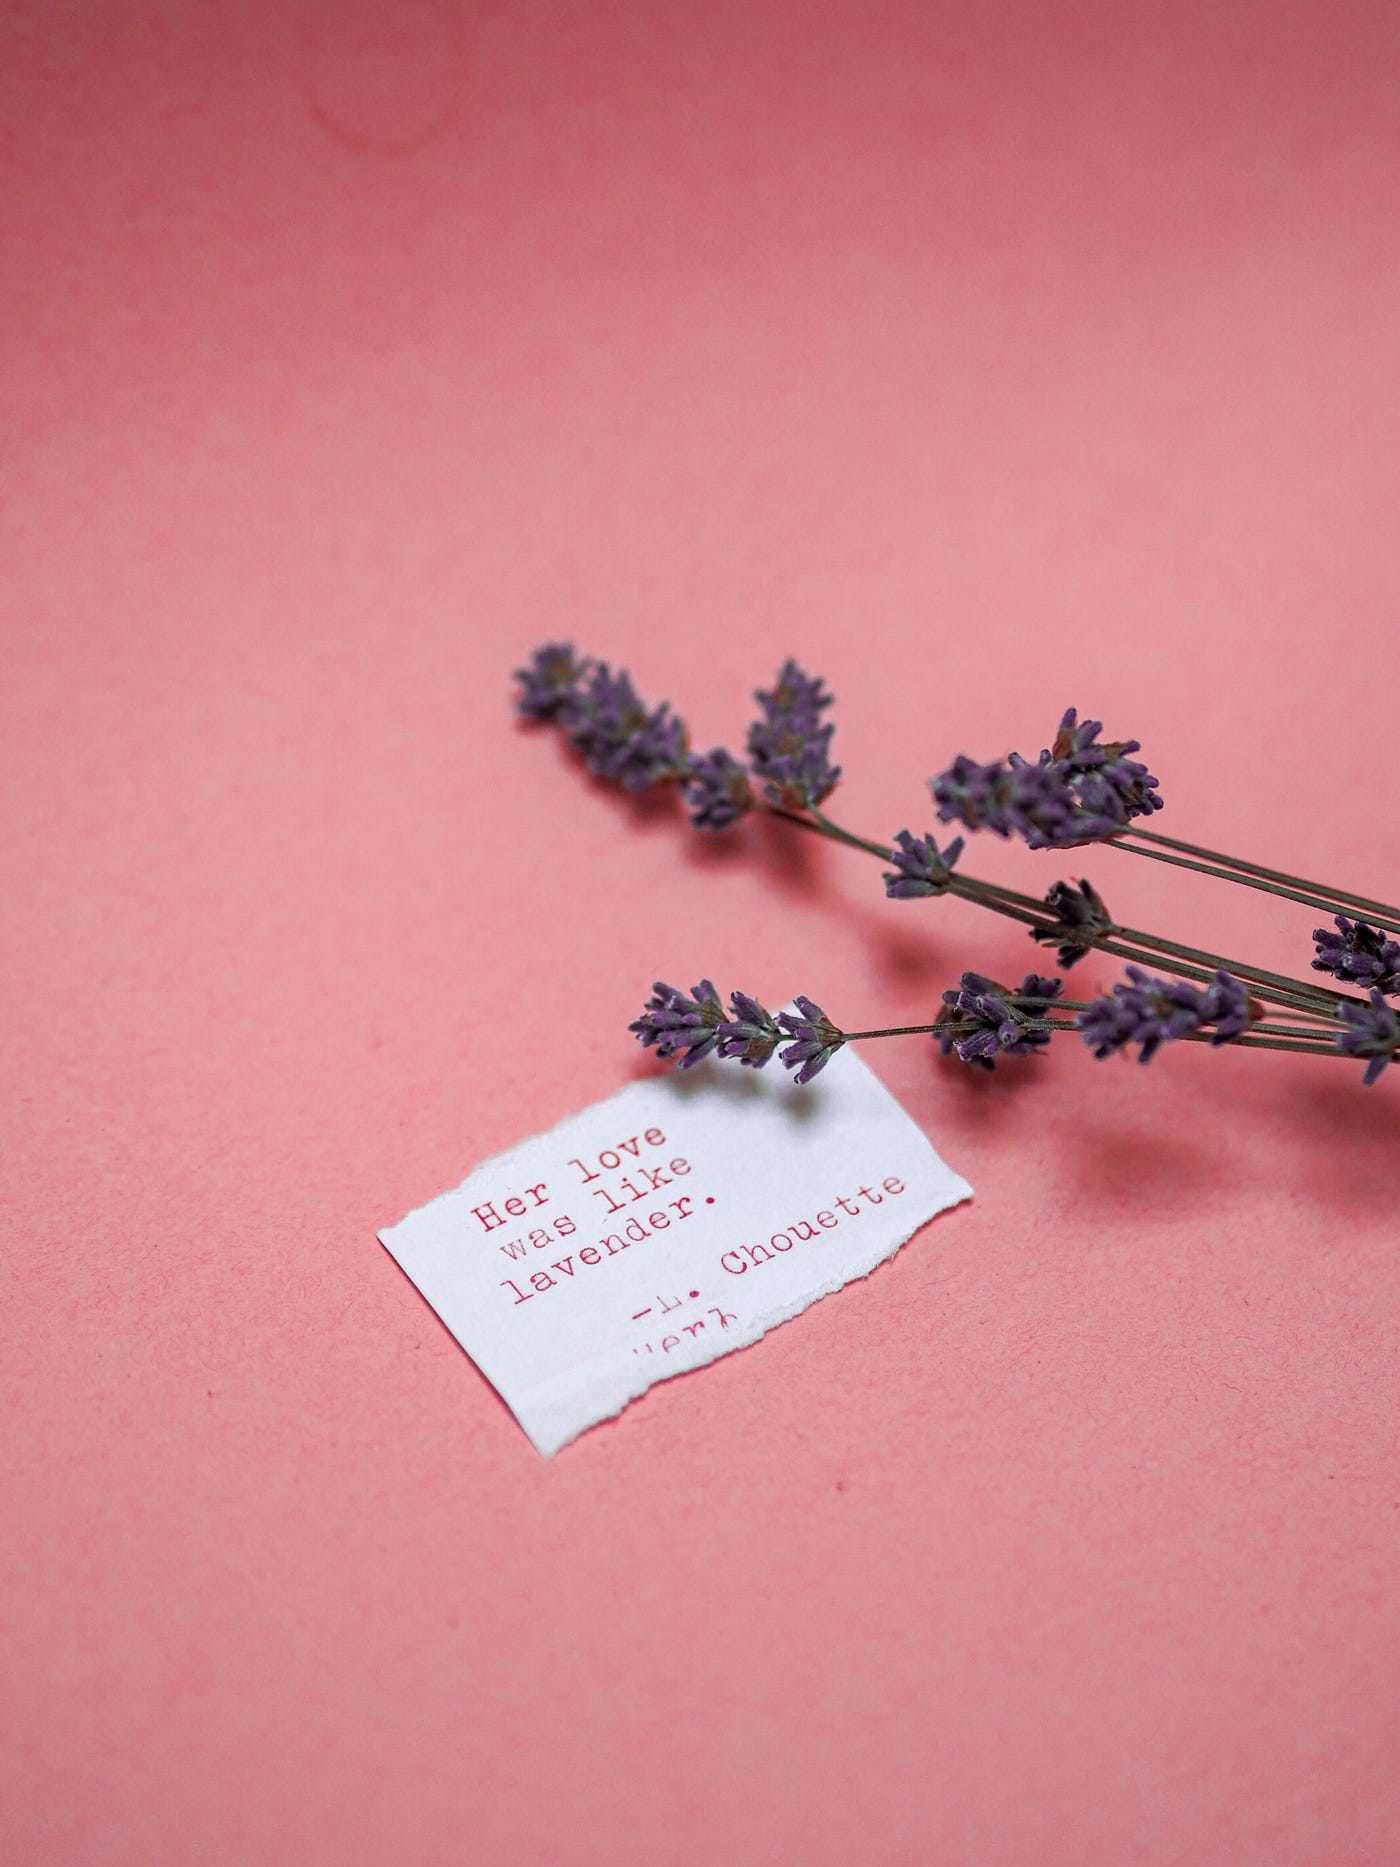 A sprig of lavender on a pink background with a small piece of paper that says 